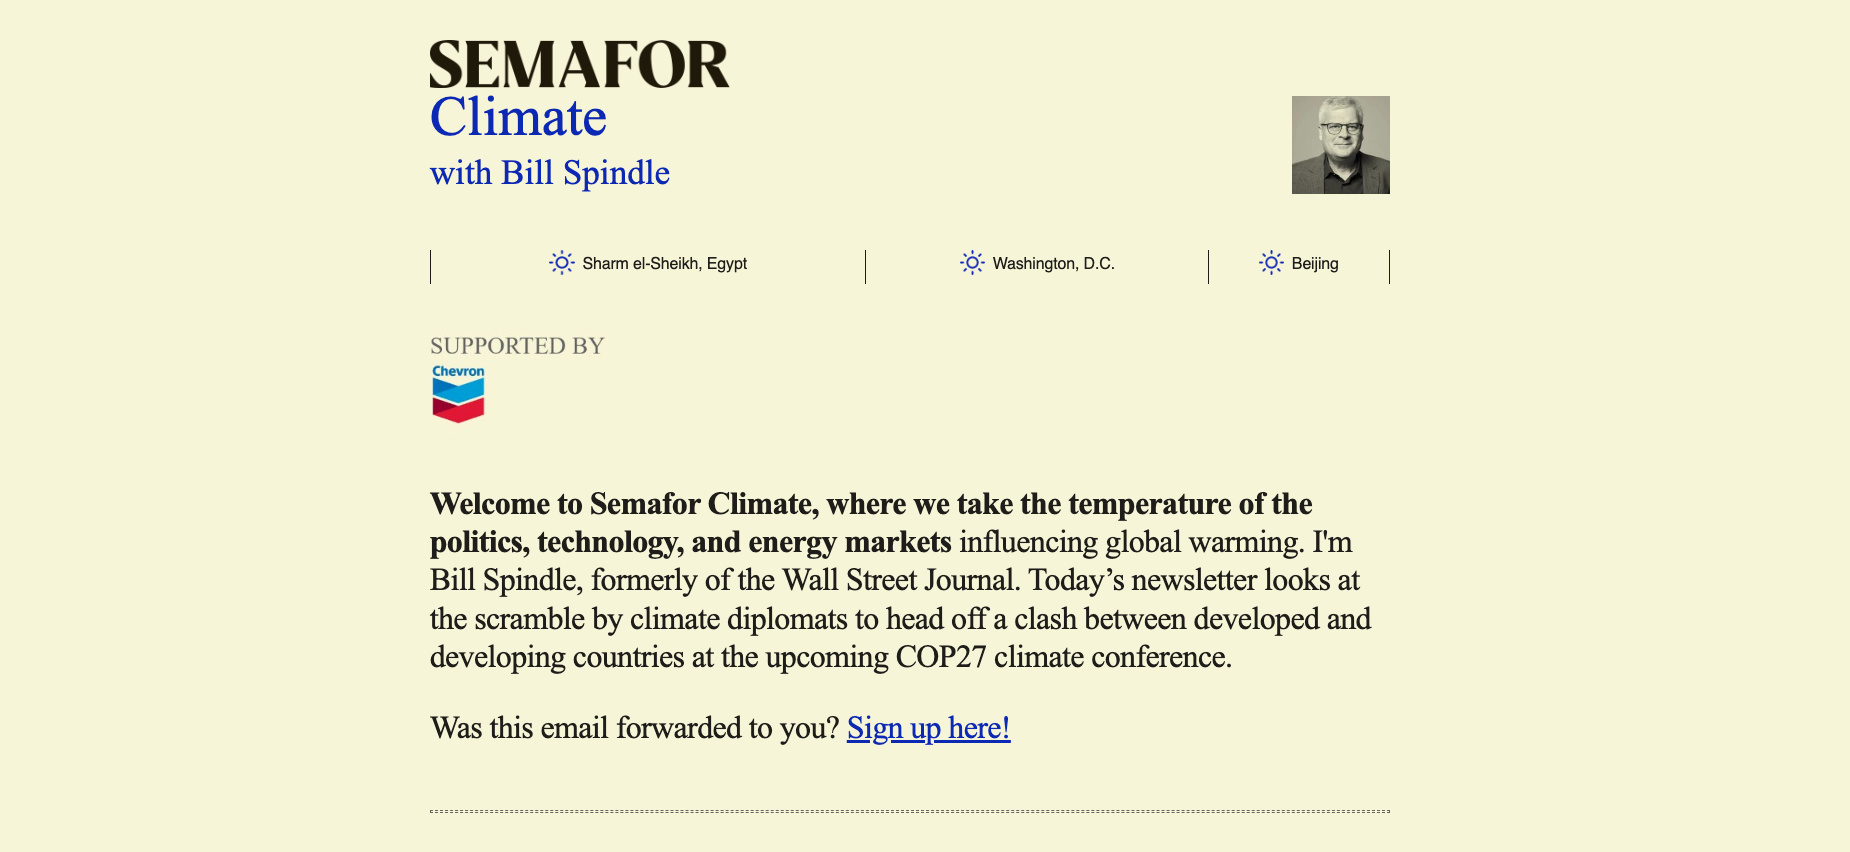 Semafor's climate newsletter launched with Chevron as a sponsor. (Screenshot: Gizmodo)